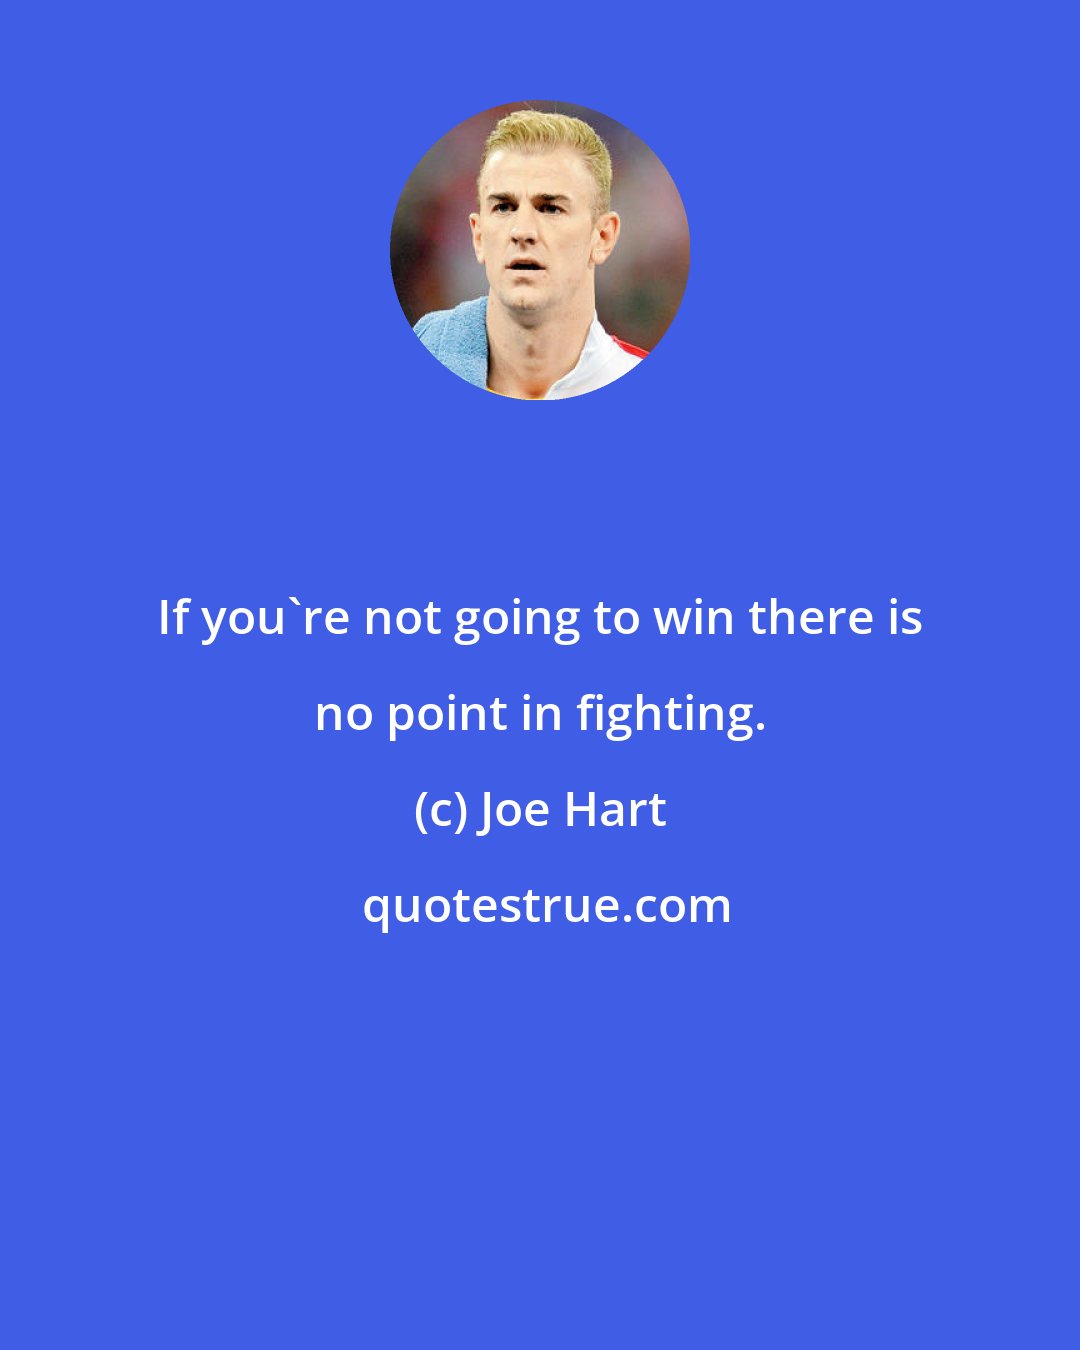 Joe Hart: If you're not going to win there is no point in fighting.